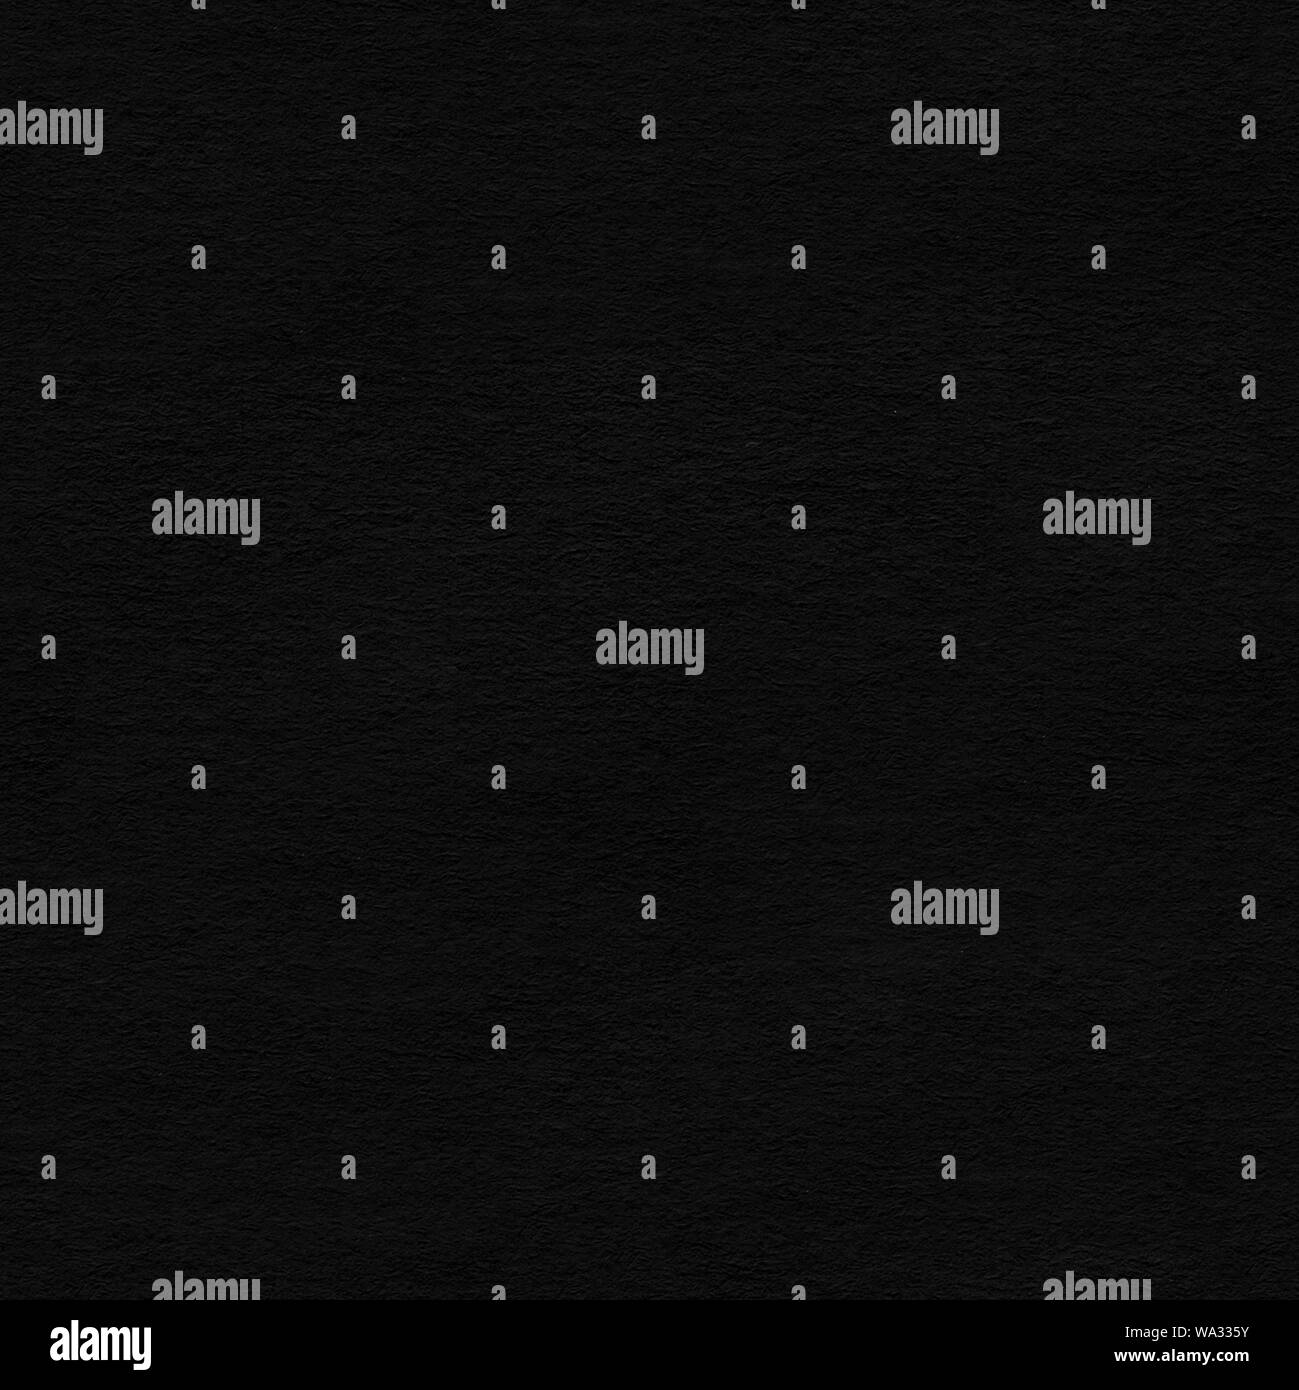 Paper texture Black and White Stock Photos & Images - Alamy